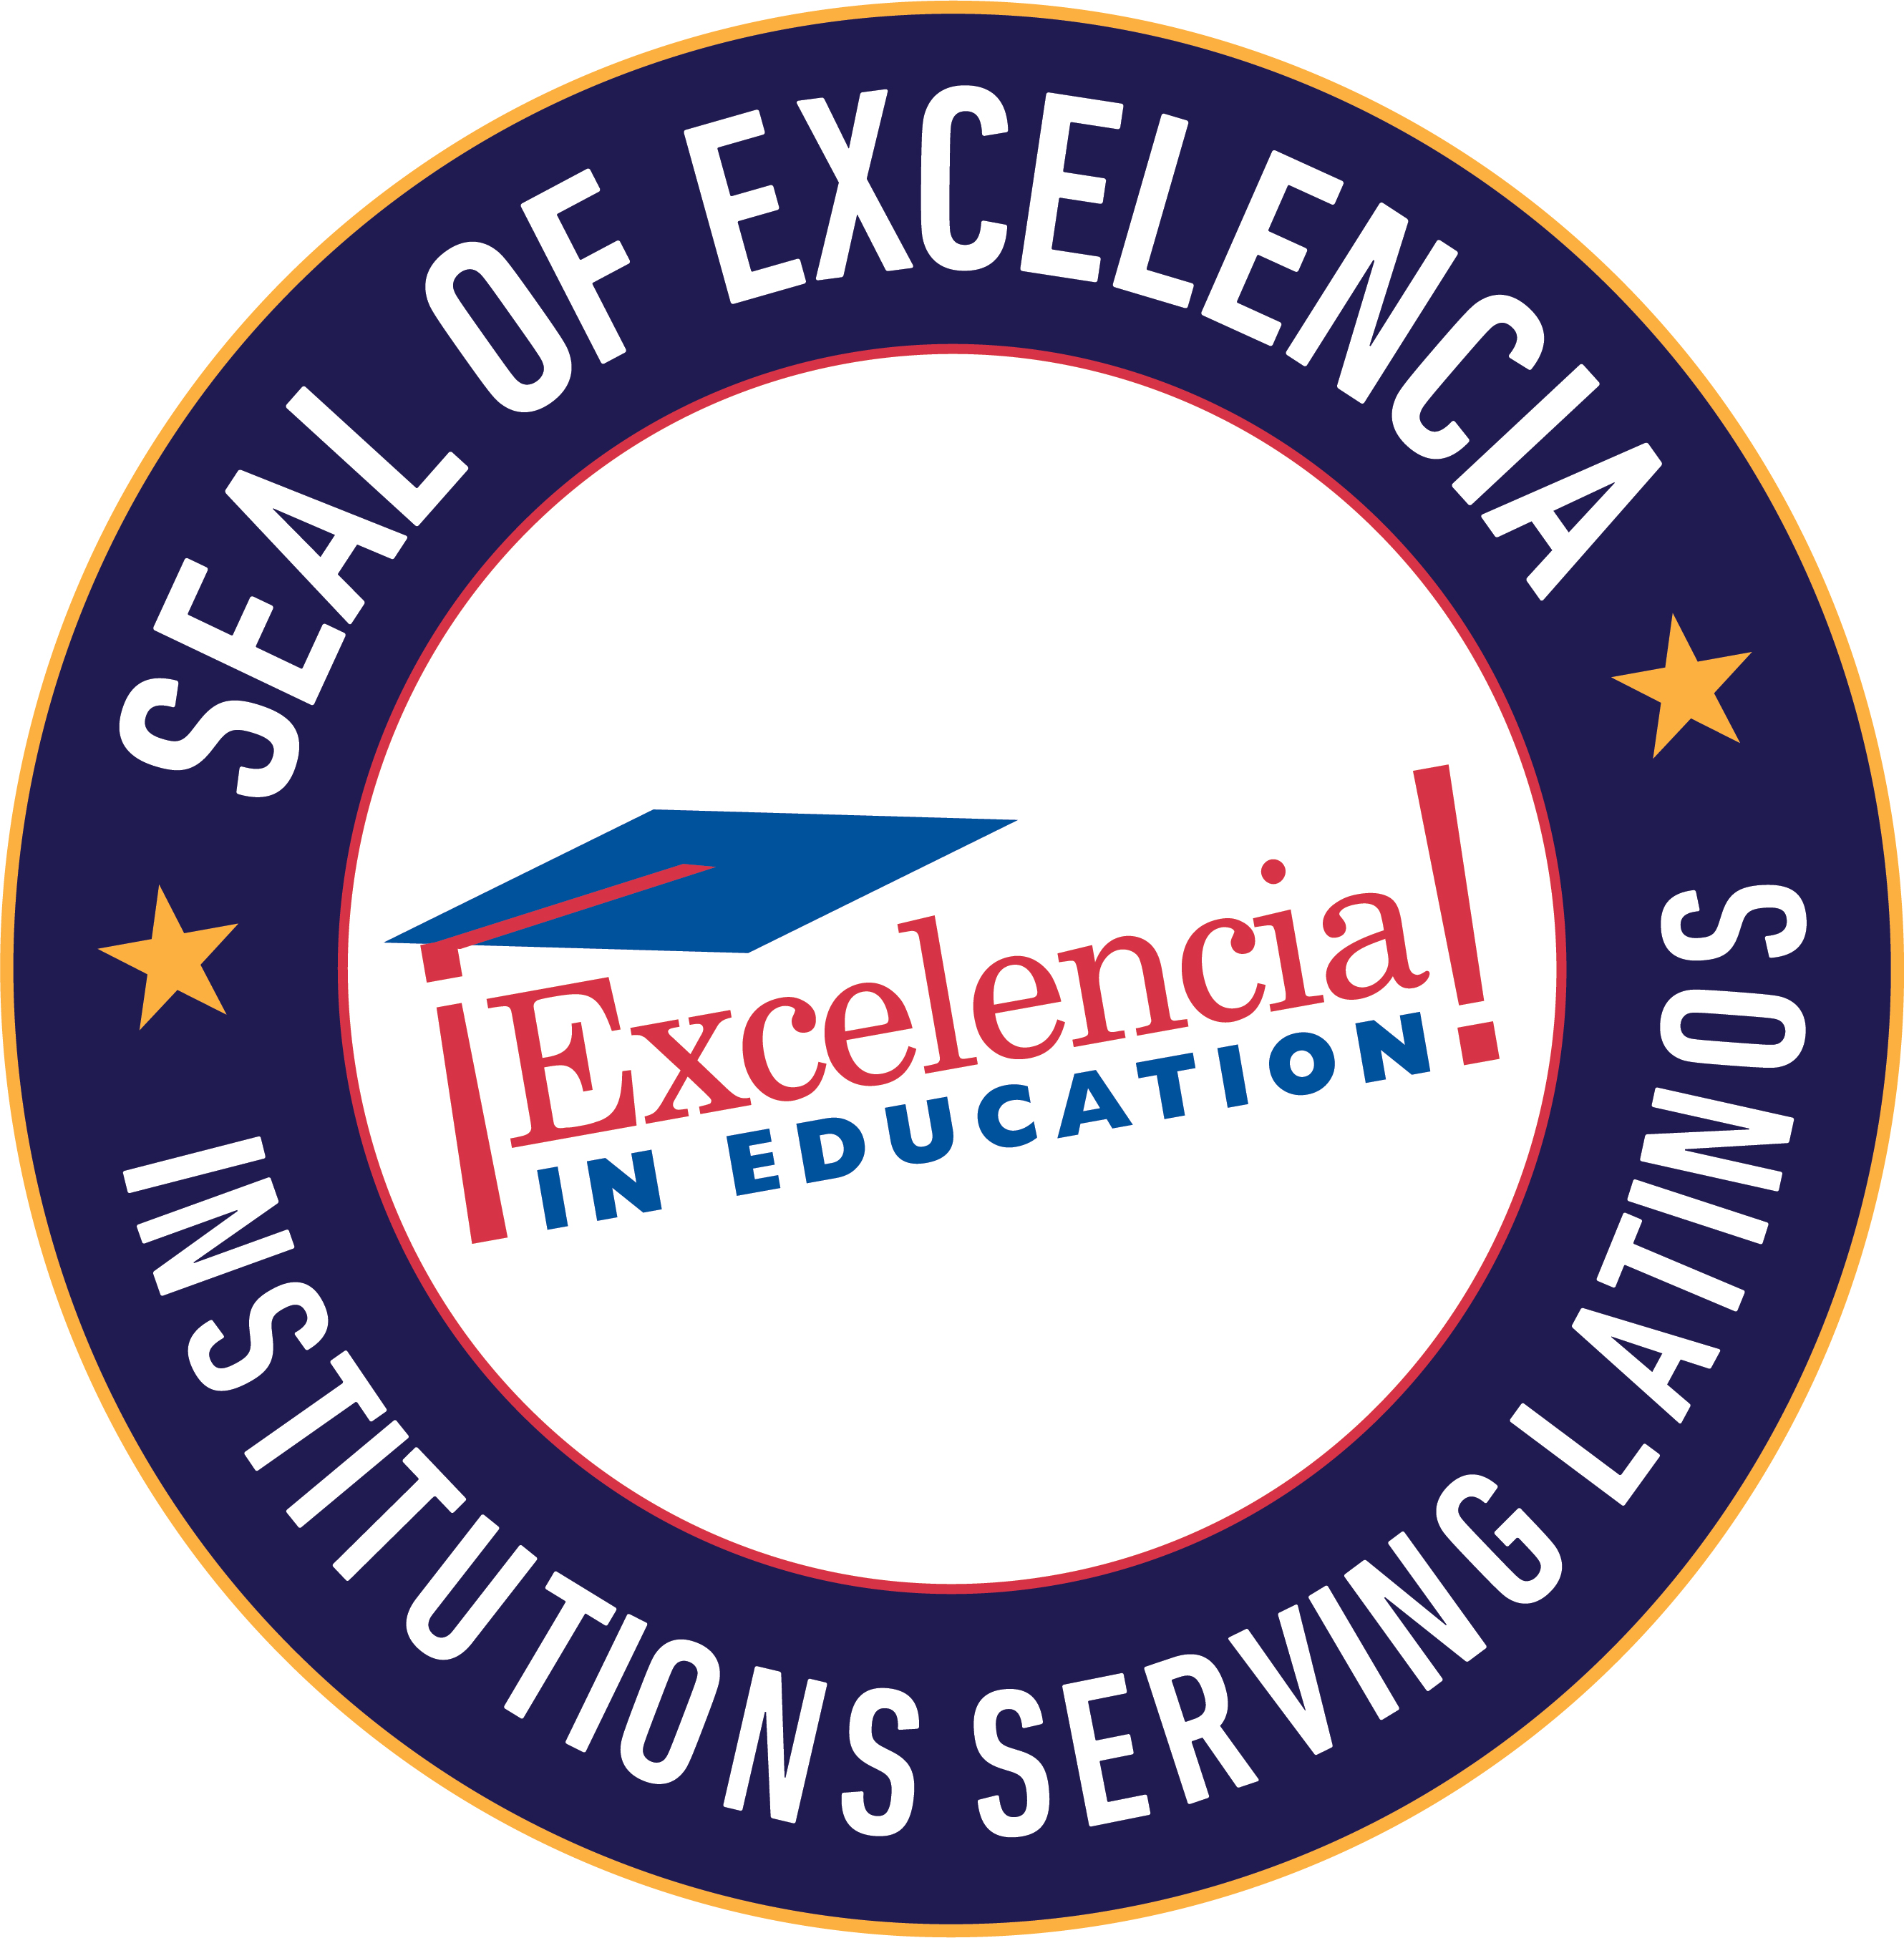 University receives national Seal of Excelencia